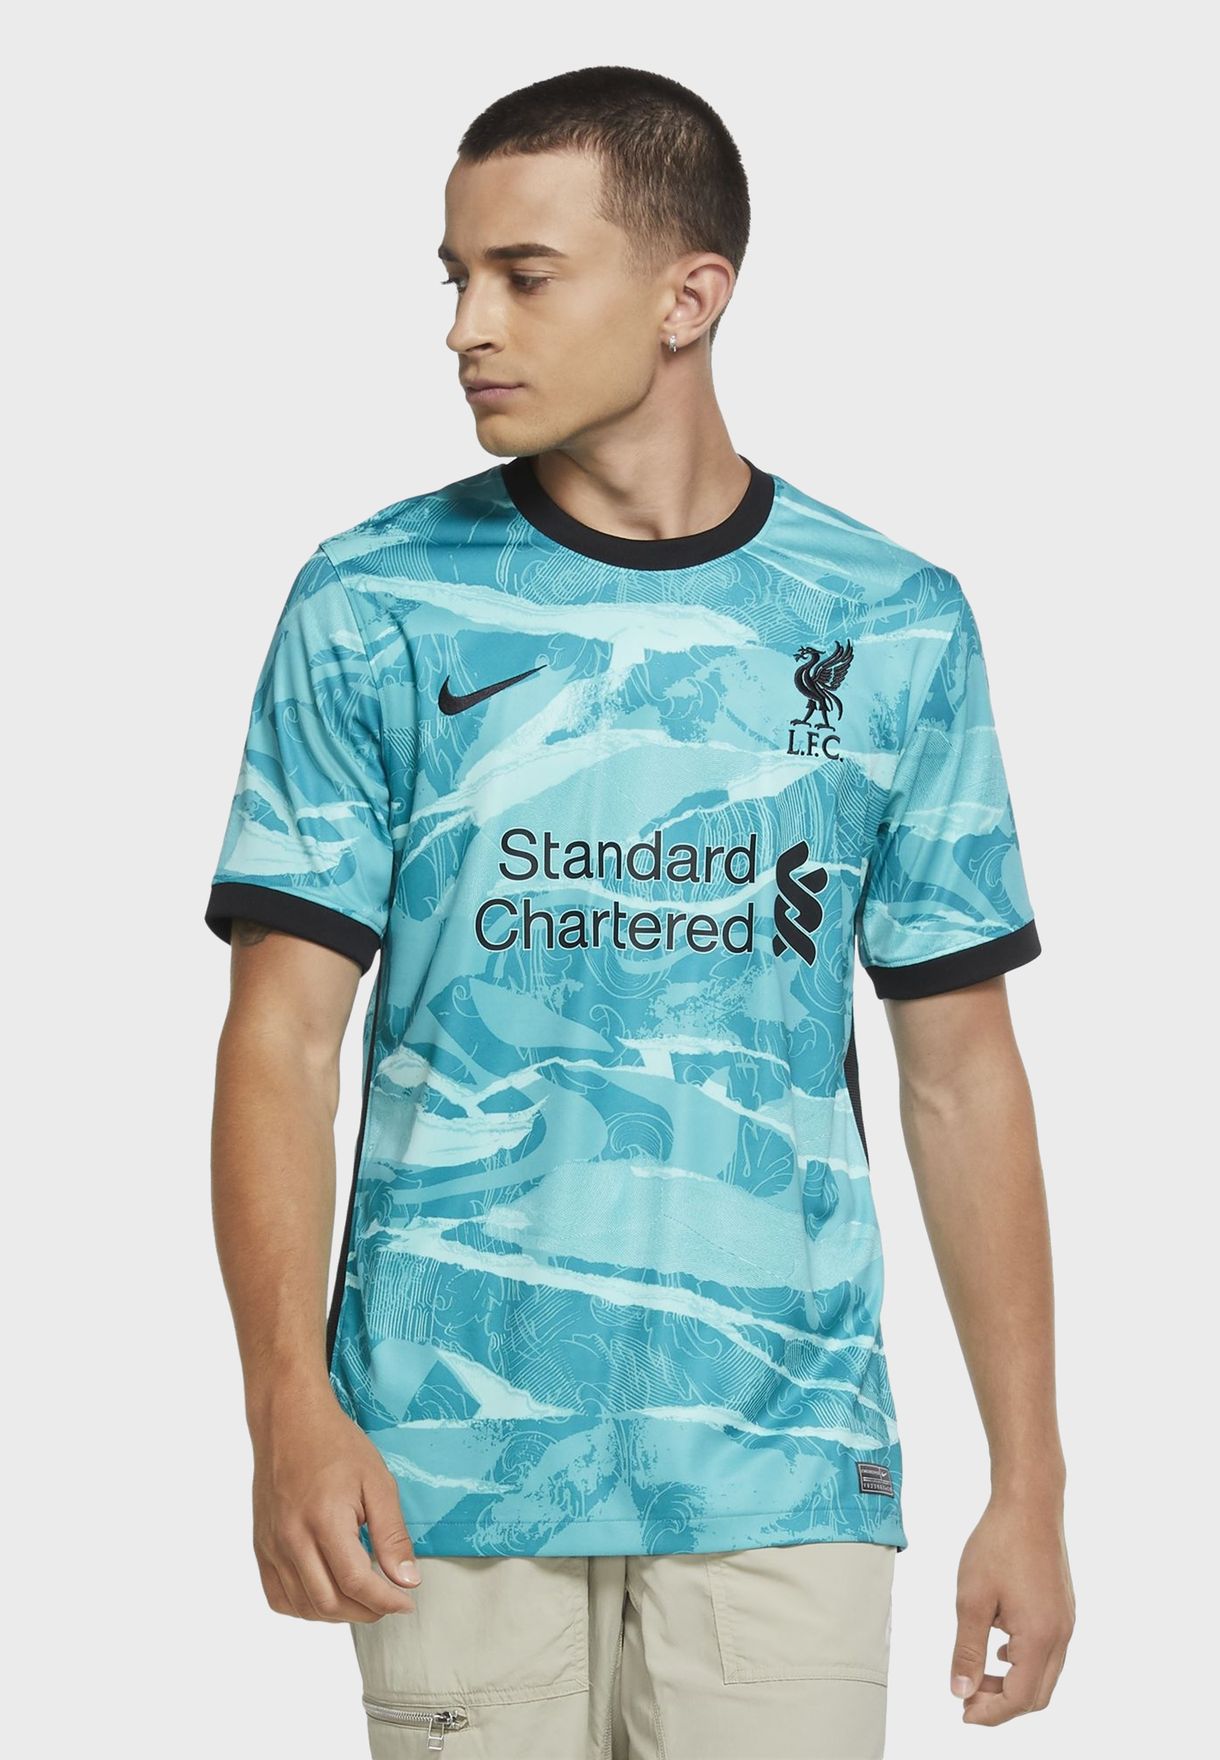 liverpool jersey black and blue